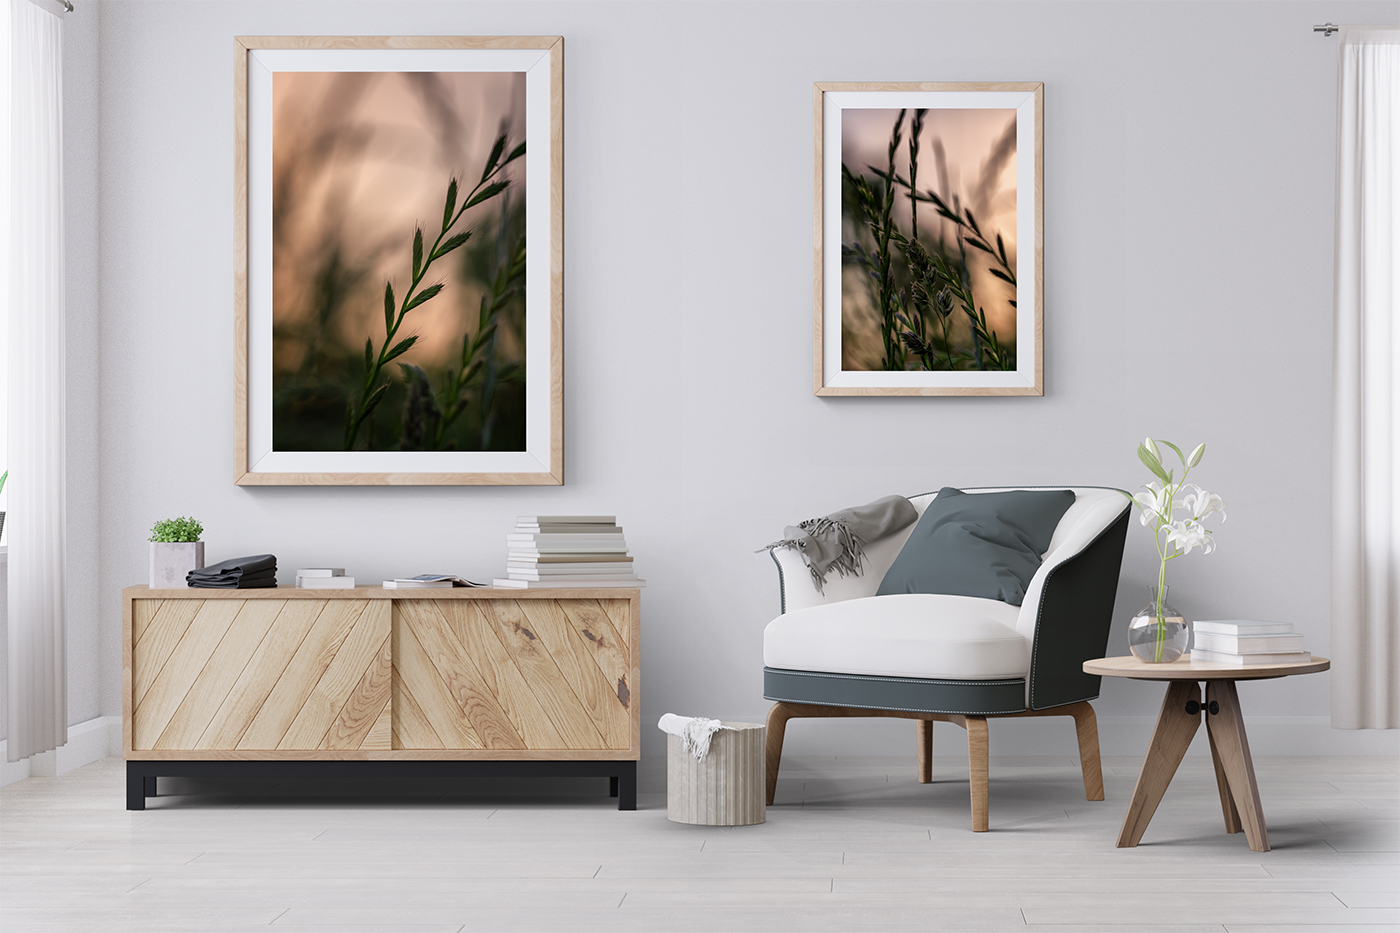 Two framed artworks, 'Nightly Breeze II' and 'Nightly Breeze I,' hang in light wooden frames on a white wall above a white and grey armchair. A wooden credenza with stacks of books and a small coffee table complete the scene.